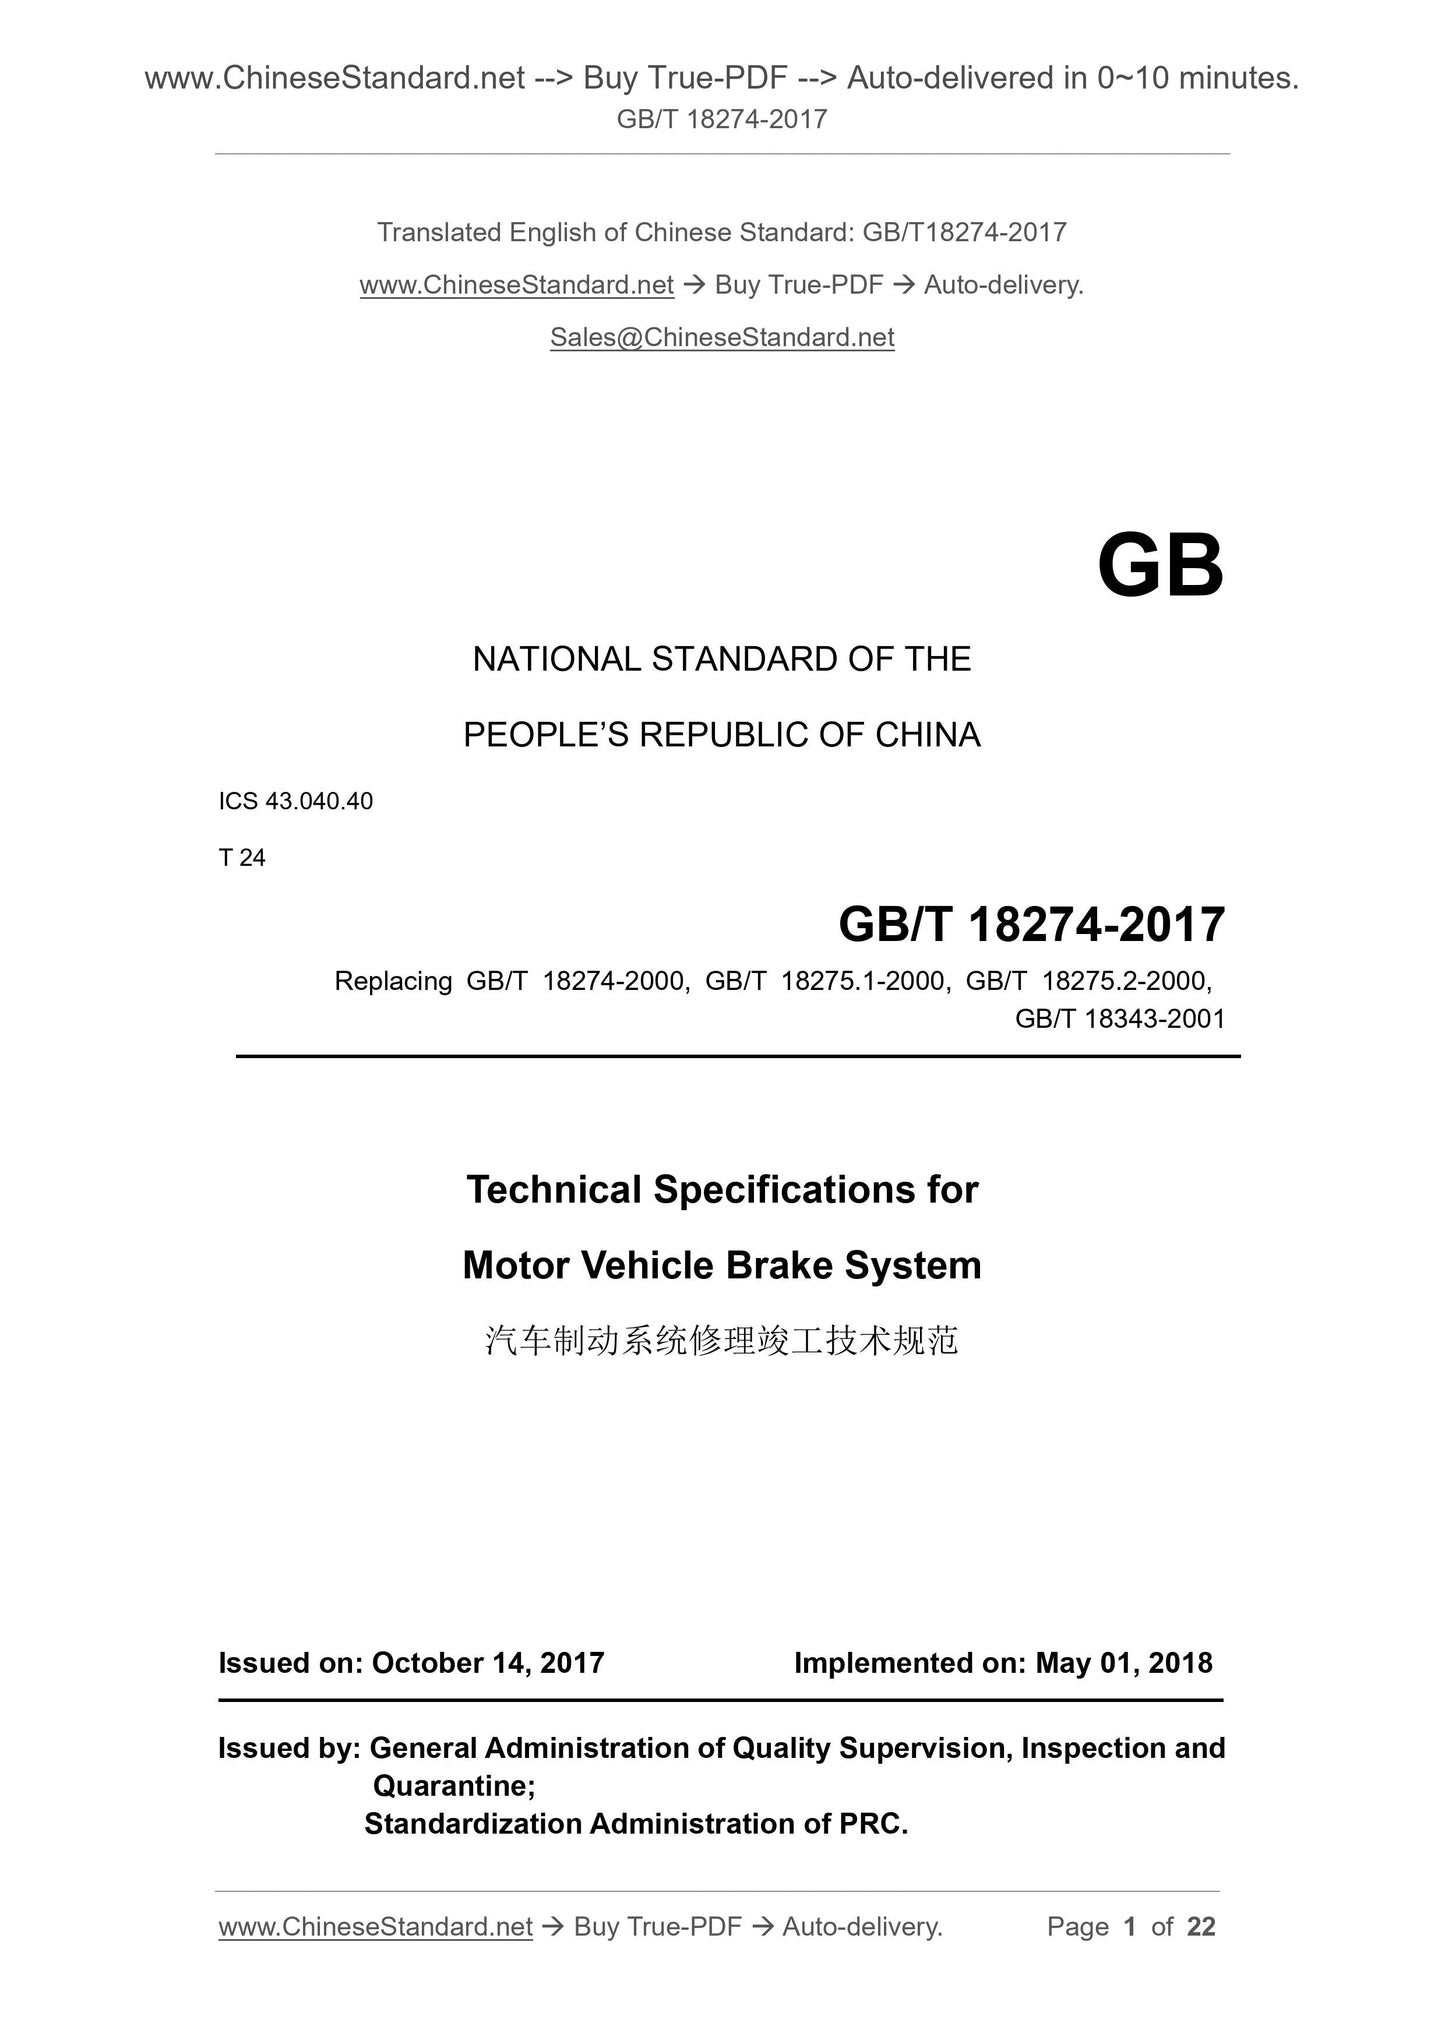 GB/T 18274-2017 Page 1